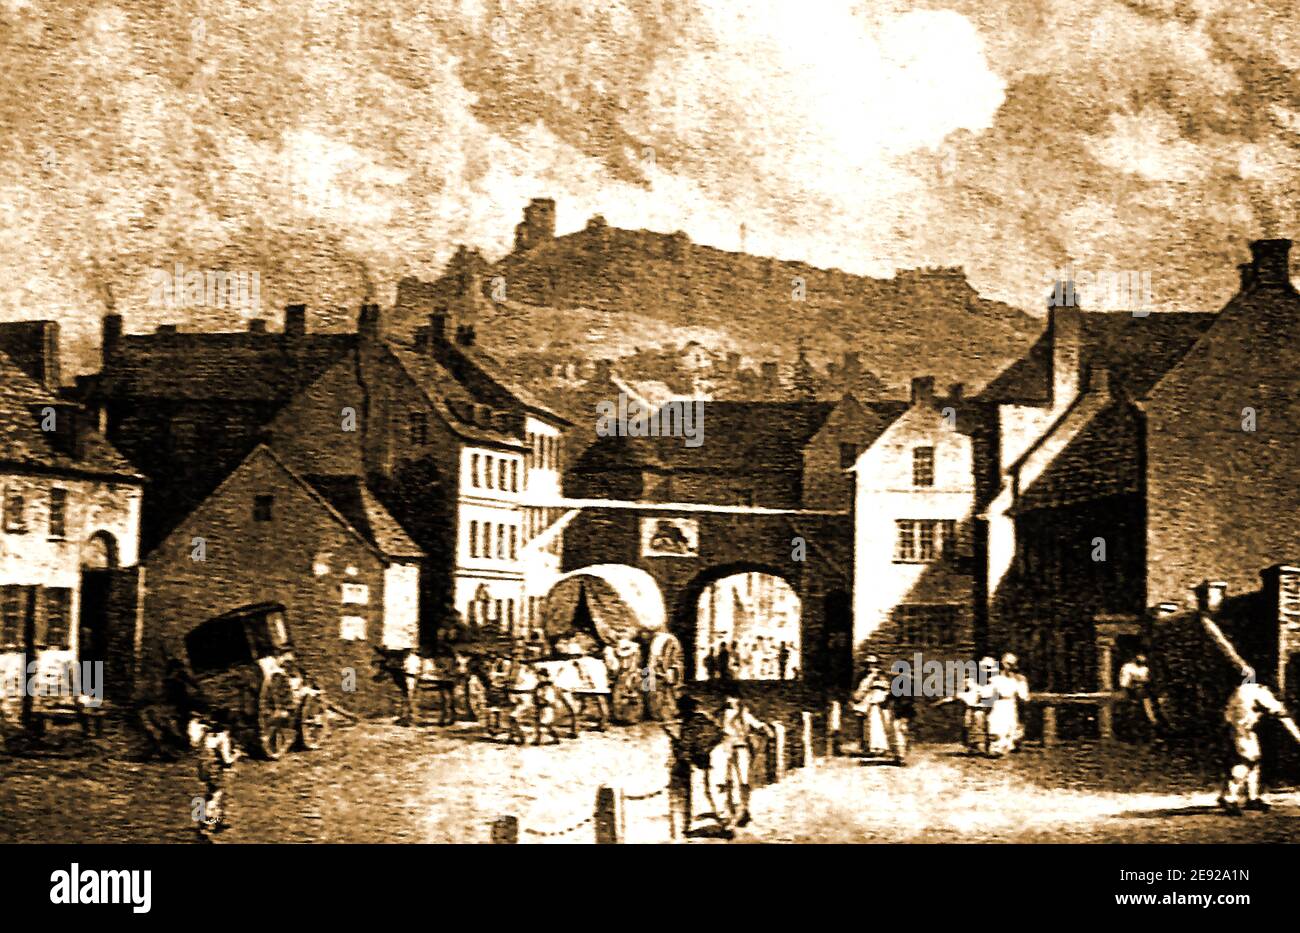 An old engraving taken in Scarborough, North Yorkshire, UK, in the early 1800's showing the former Newborough Bar which was part of the old town walls.. The Bull Inn is sitated to the left of the cart. The bar with its archway  containing the town's jail was rebuilt in 1843 with turrets. In the distance is Scarborough Castle and its walls which were greatly damaged during the bombardment of Scarborough by German Warships. Stock Photo